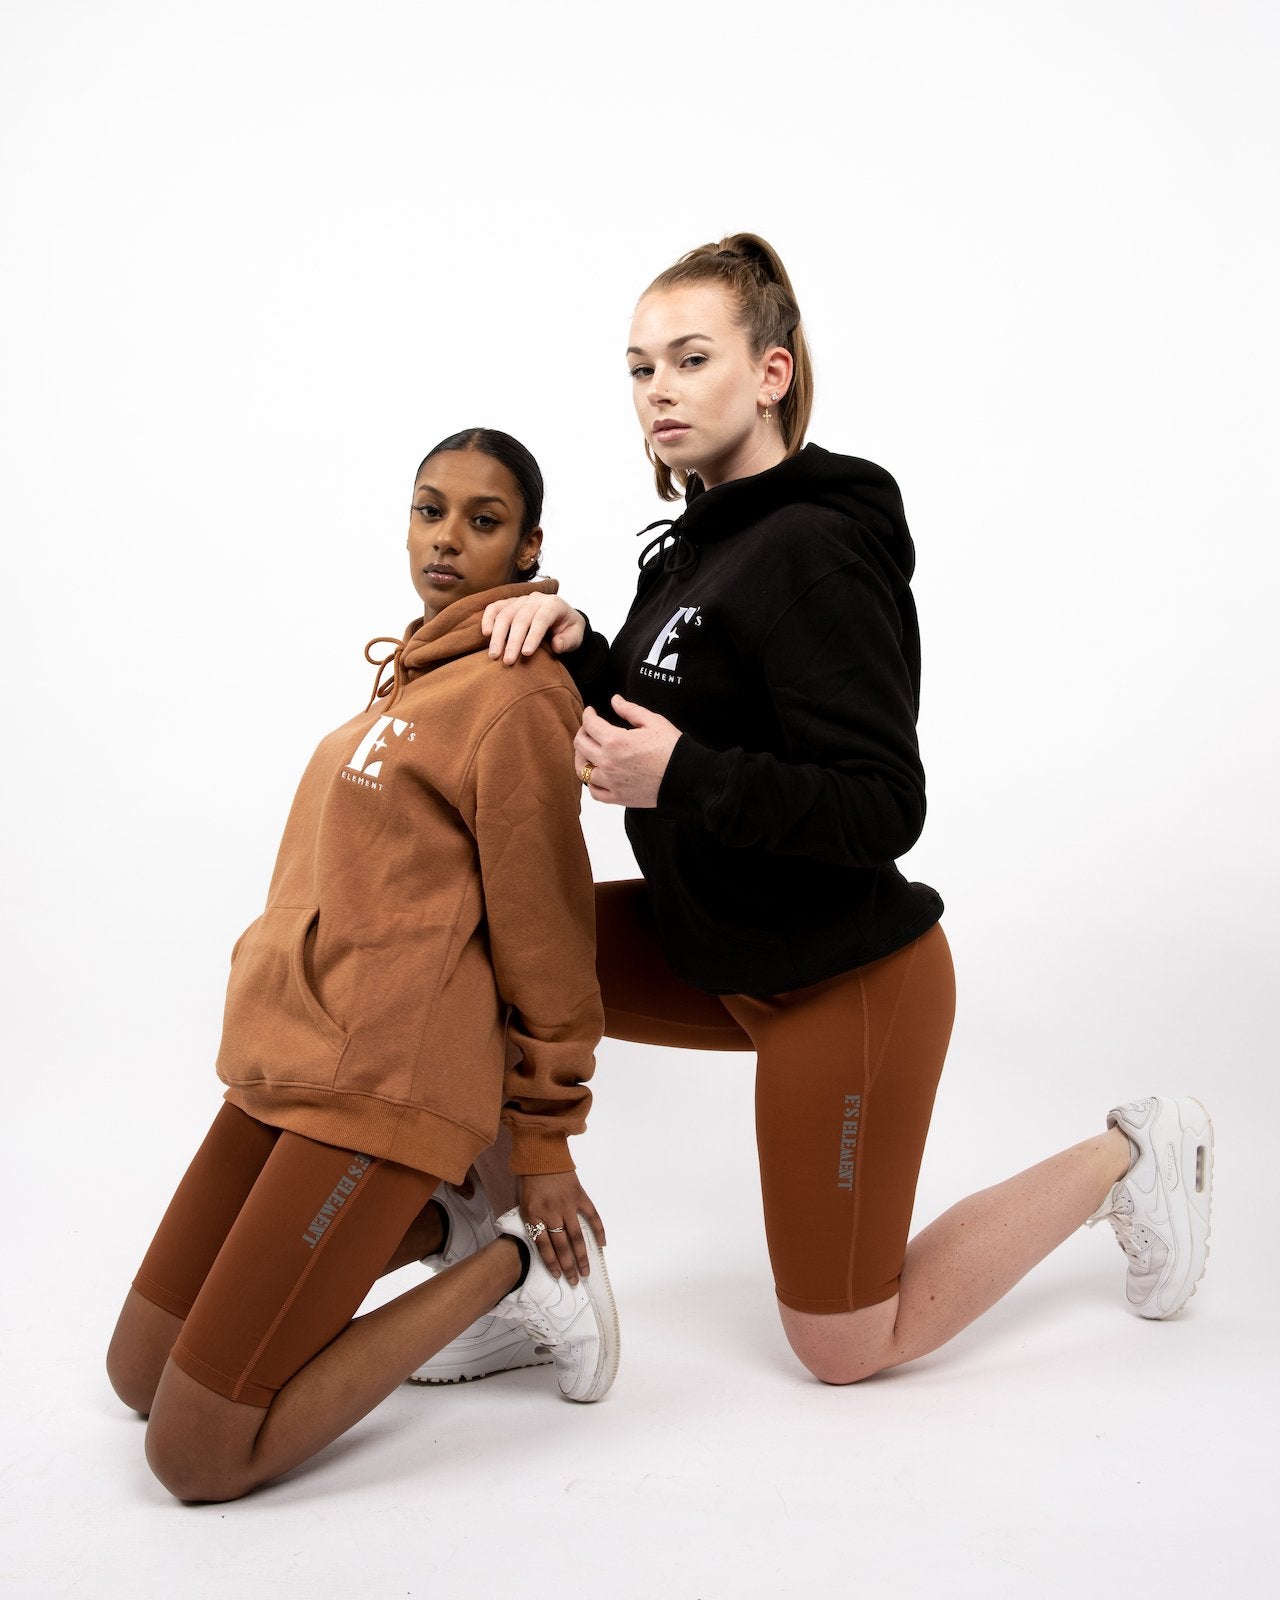 The model on the left is wearing a light brown hoodie. The model on the right is wearing a black hoodie. Both of the models are wearing brown biker shorts and white sneakers. The Ella Shaping Cycling Shorts (Petite Size) by E's Element.